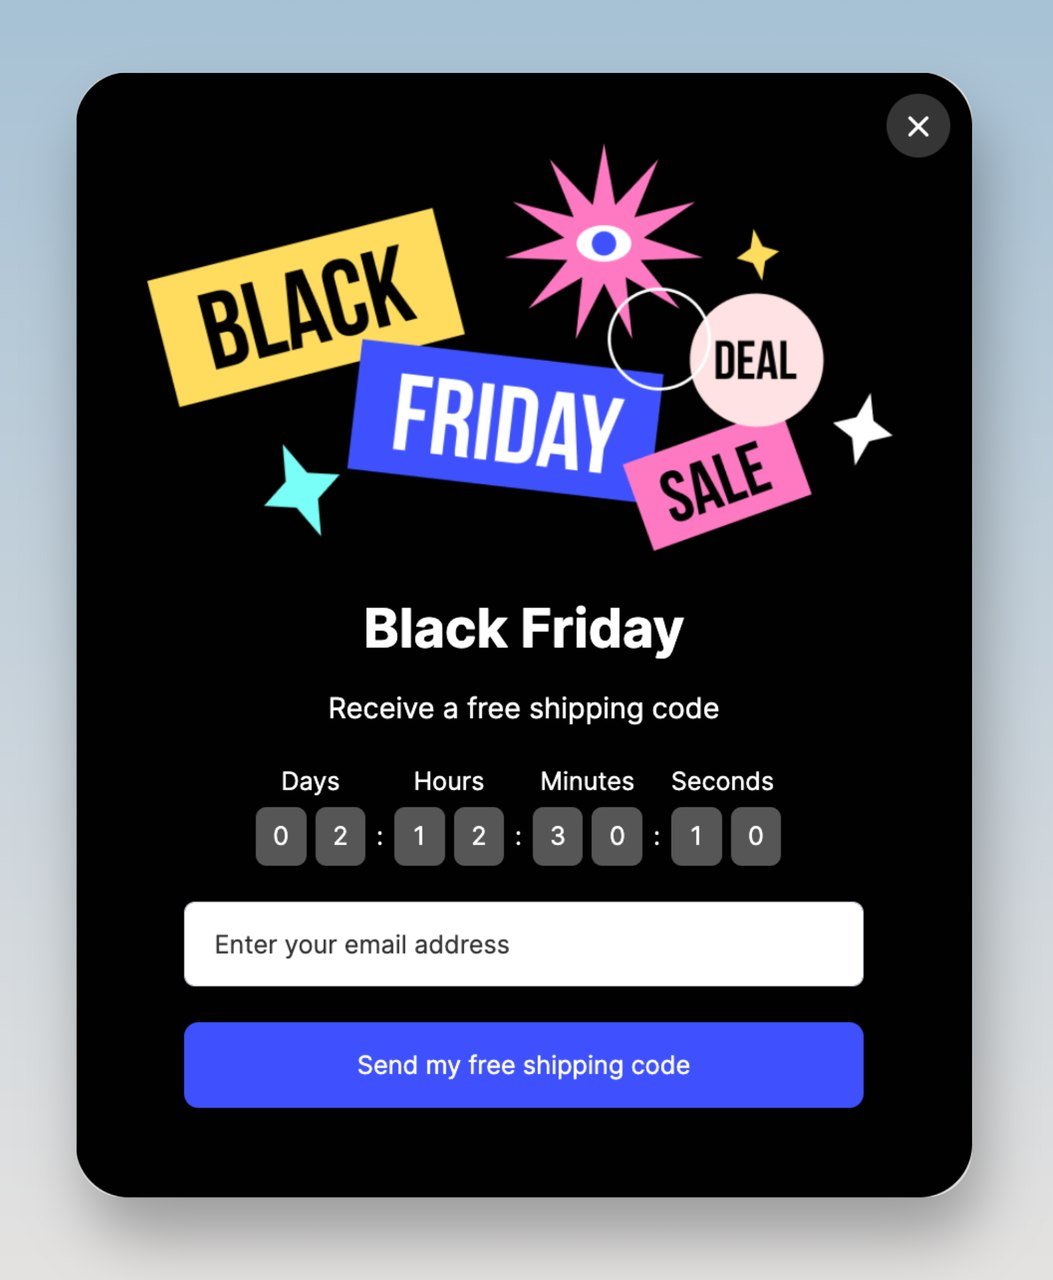 a Black Friday popup with a countdown timer offering a Black Friday free shipping code